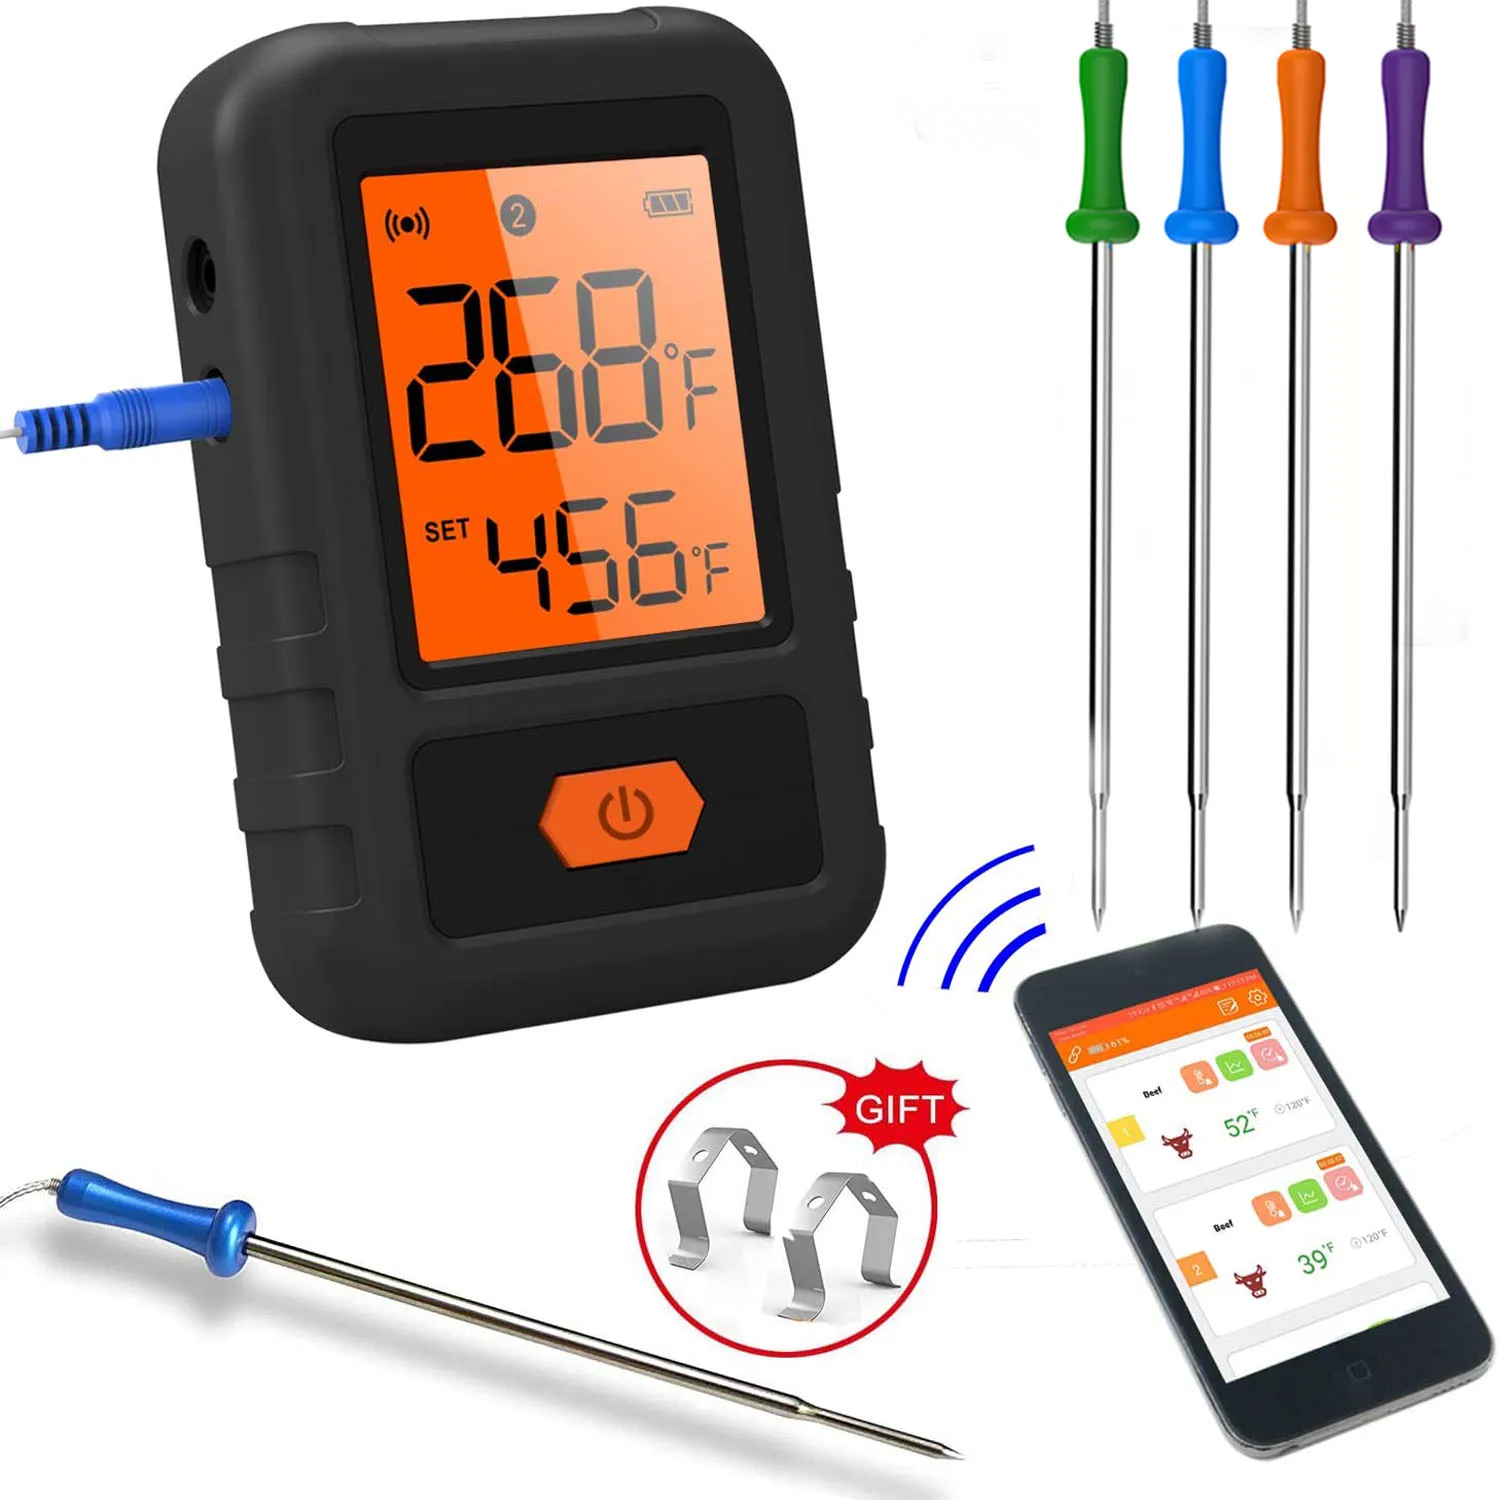 

Wireless Bluetooth Food Meat Thermometer Remote 4 Probes for Grill Barbecue Cooking Smoker Oven Kitchen